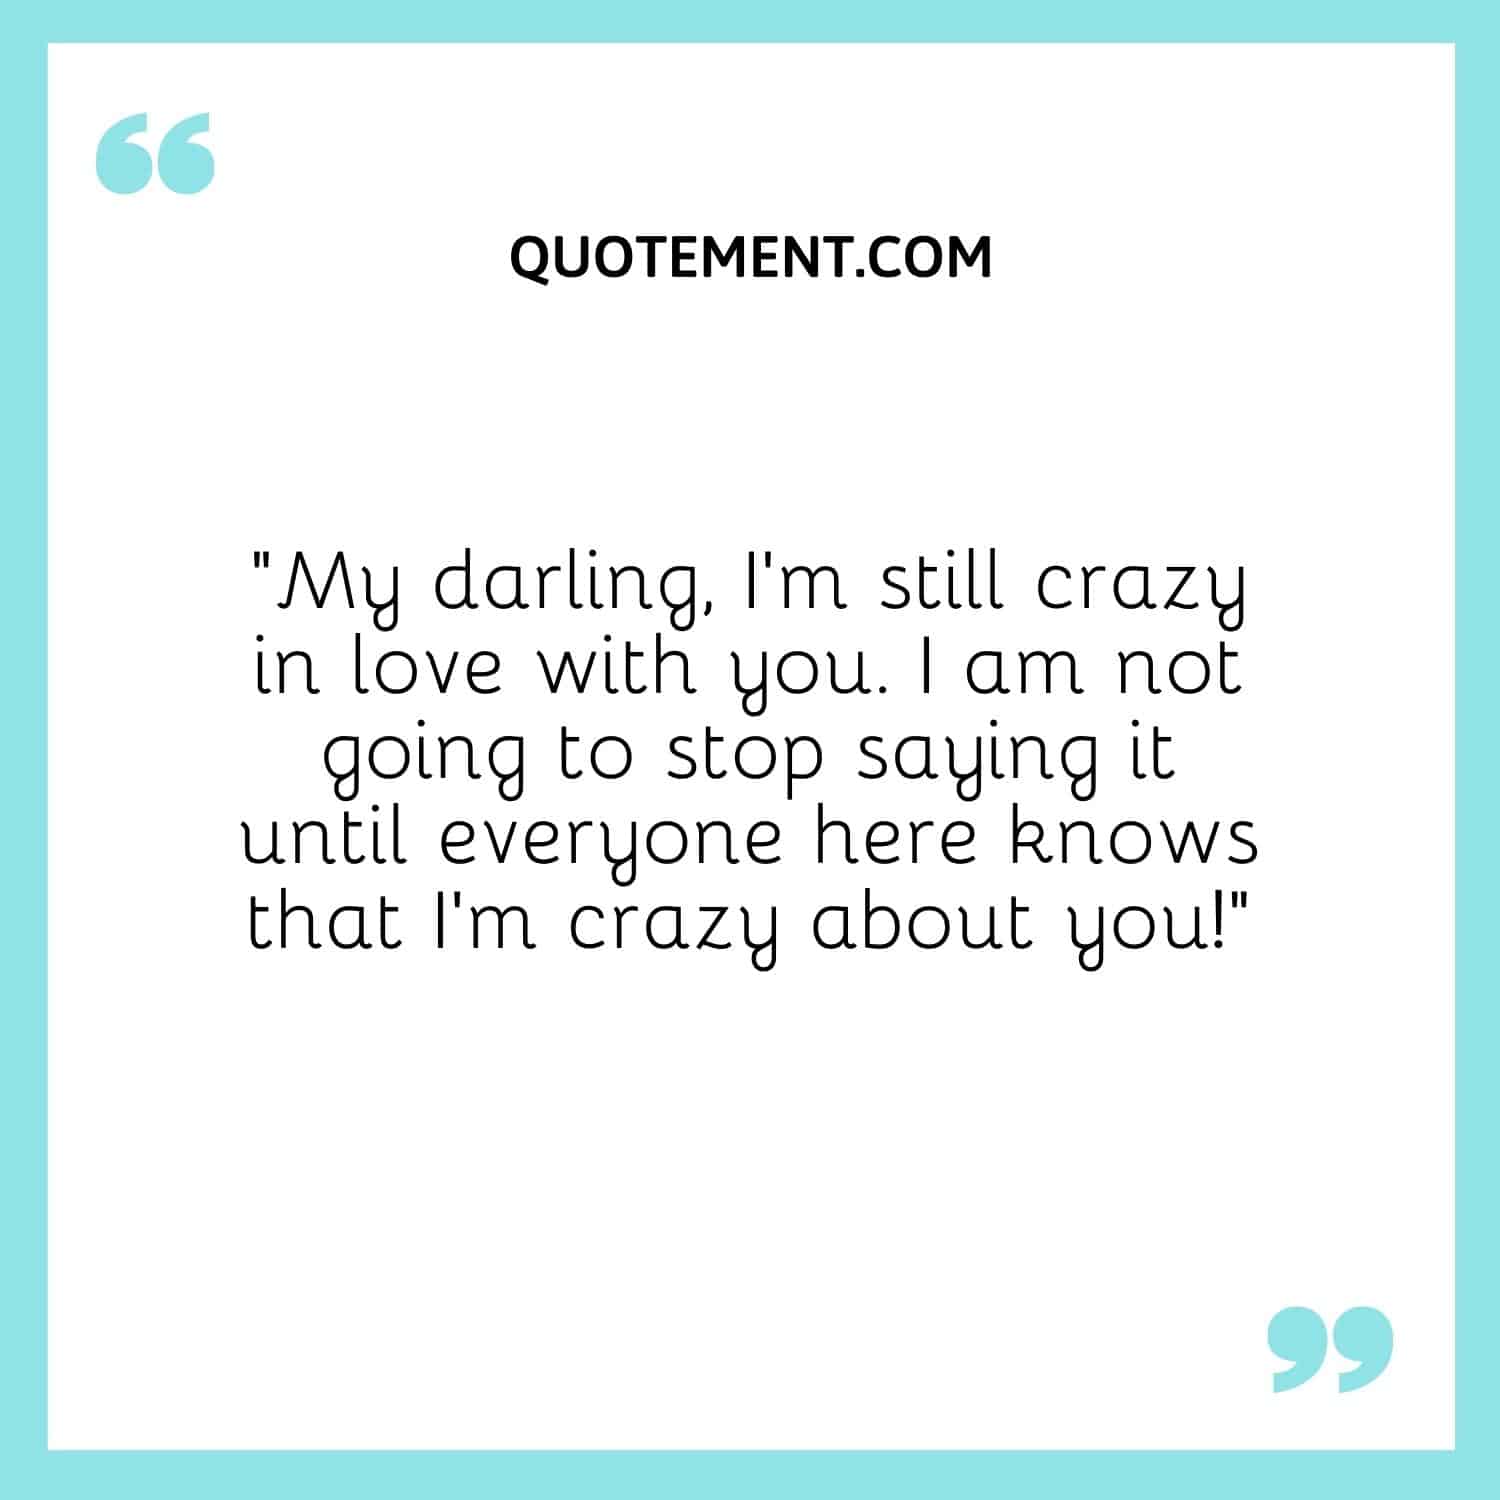 I am not going to stop saying it until everyone here knows that I’m crazy about you